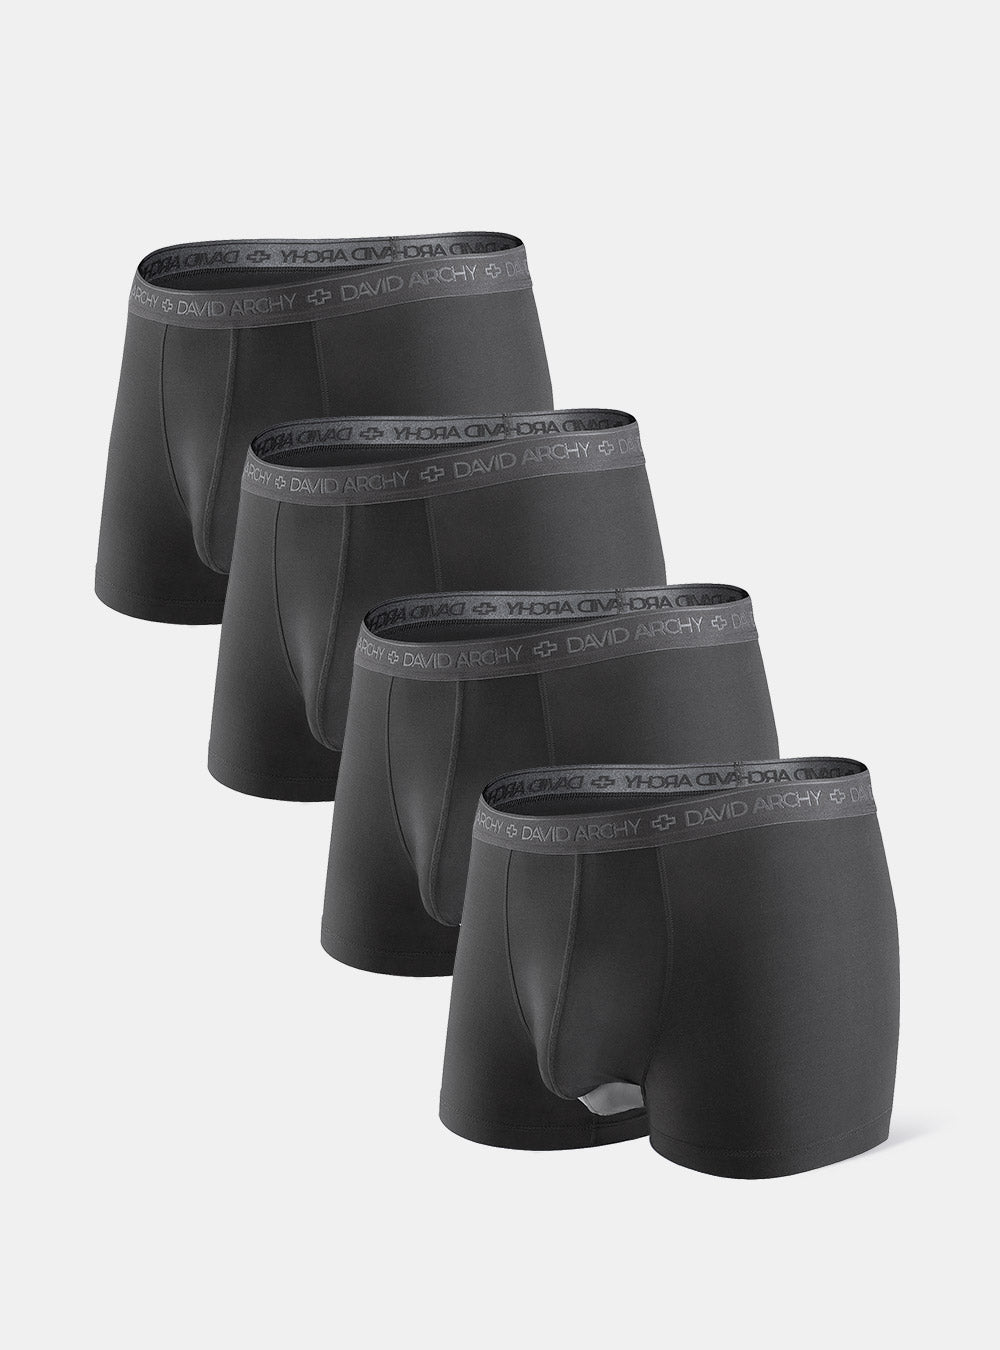 4 Packs Separate Modal 3D Pouch Trunks | David Archy | Reviews on Judge.me